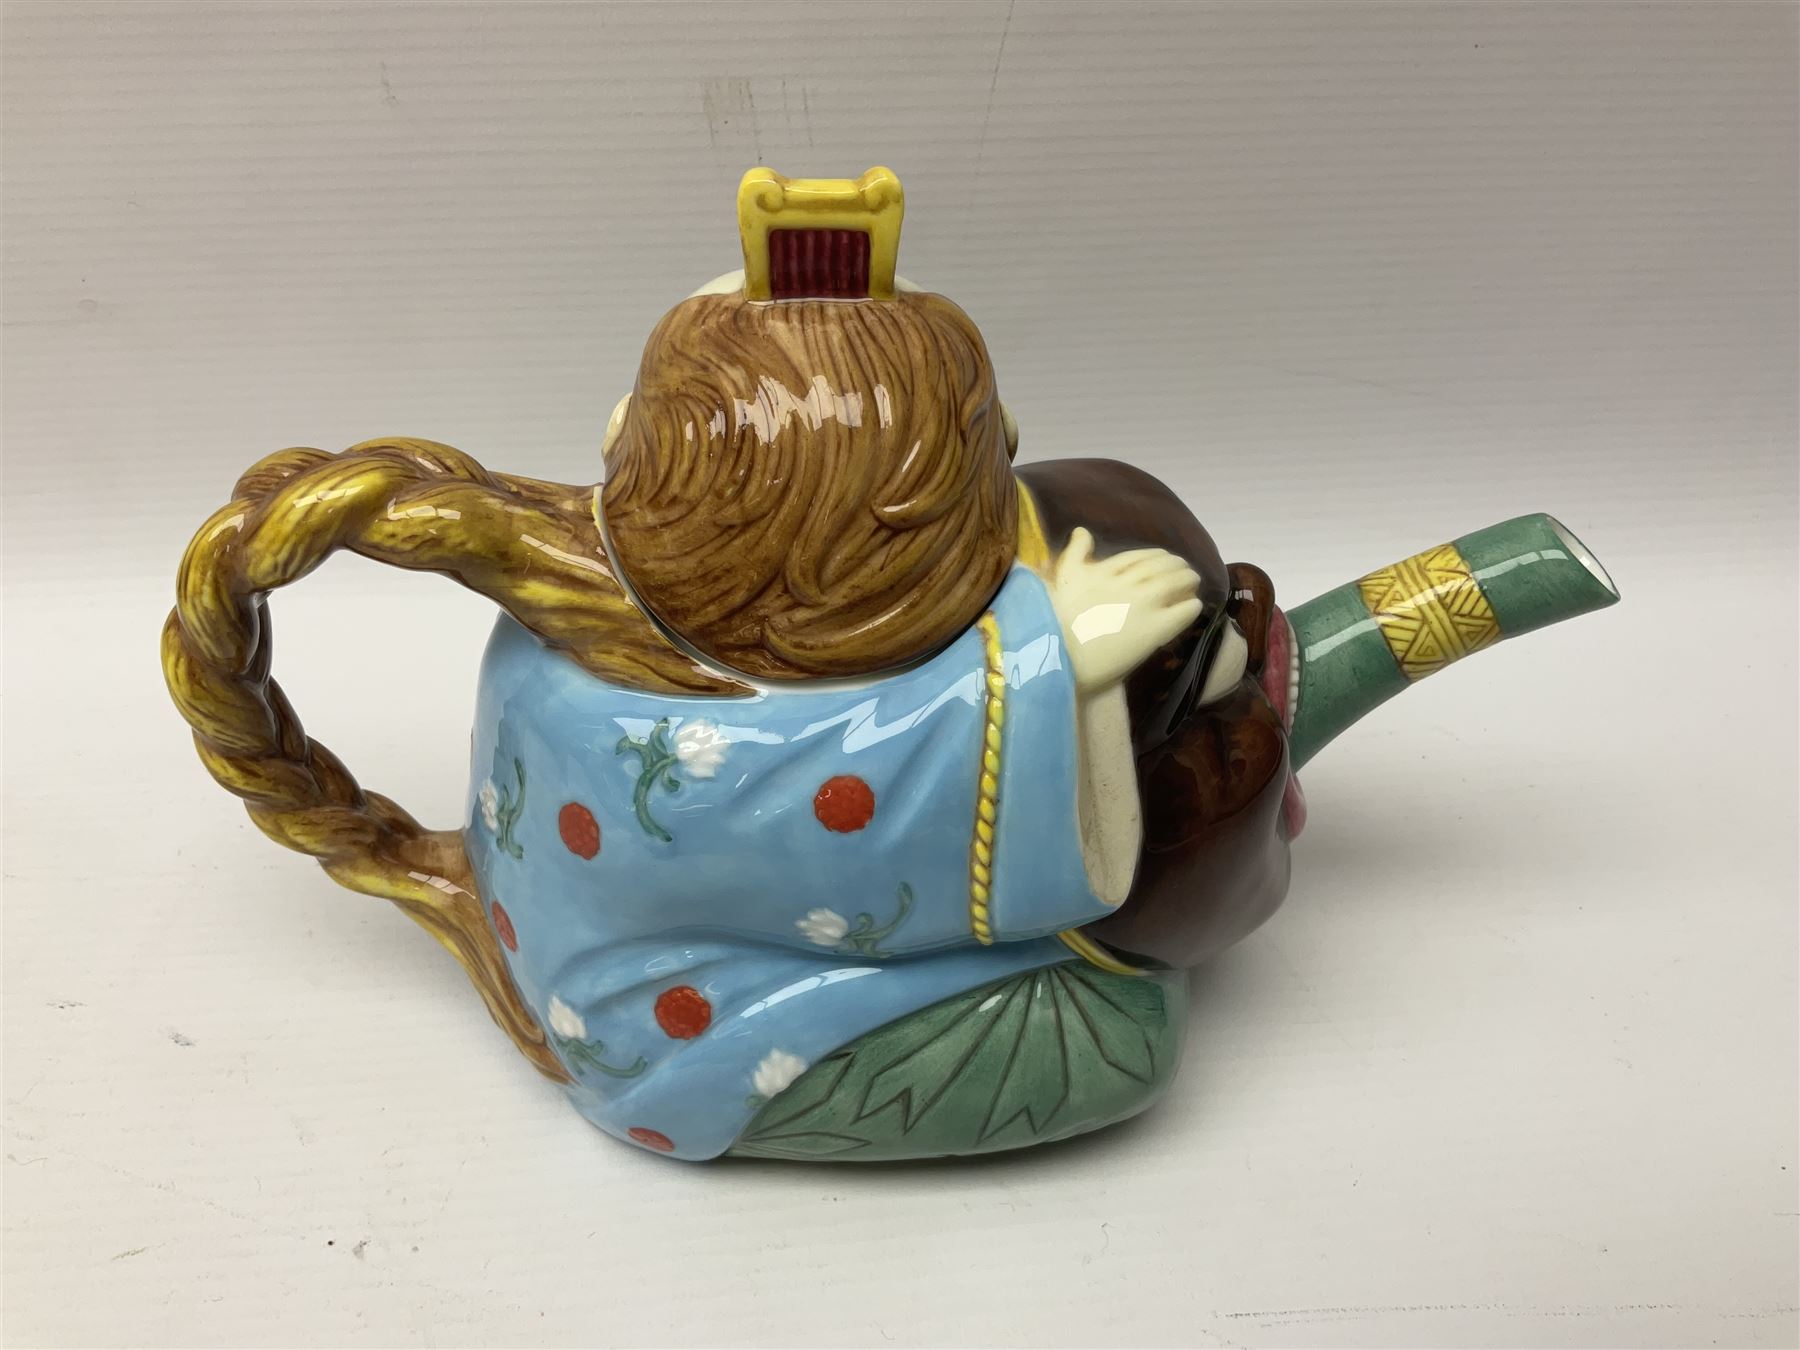 Minton Archive collection chinaman teapot - Image 10 of 12